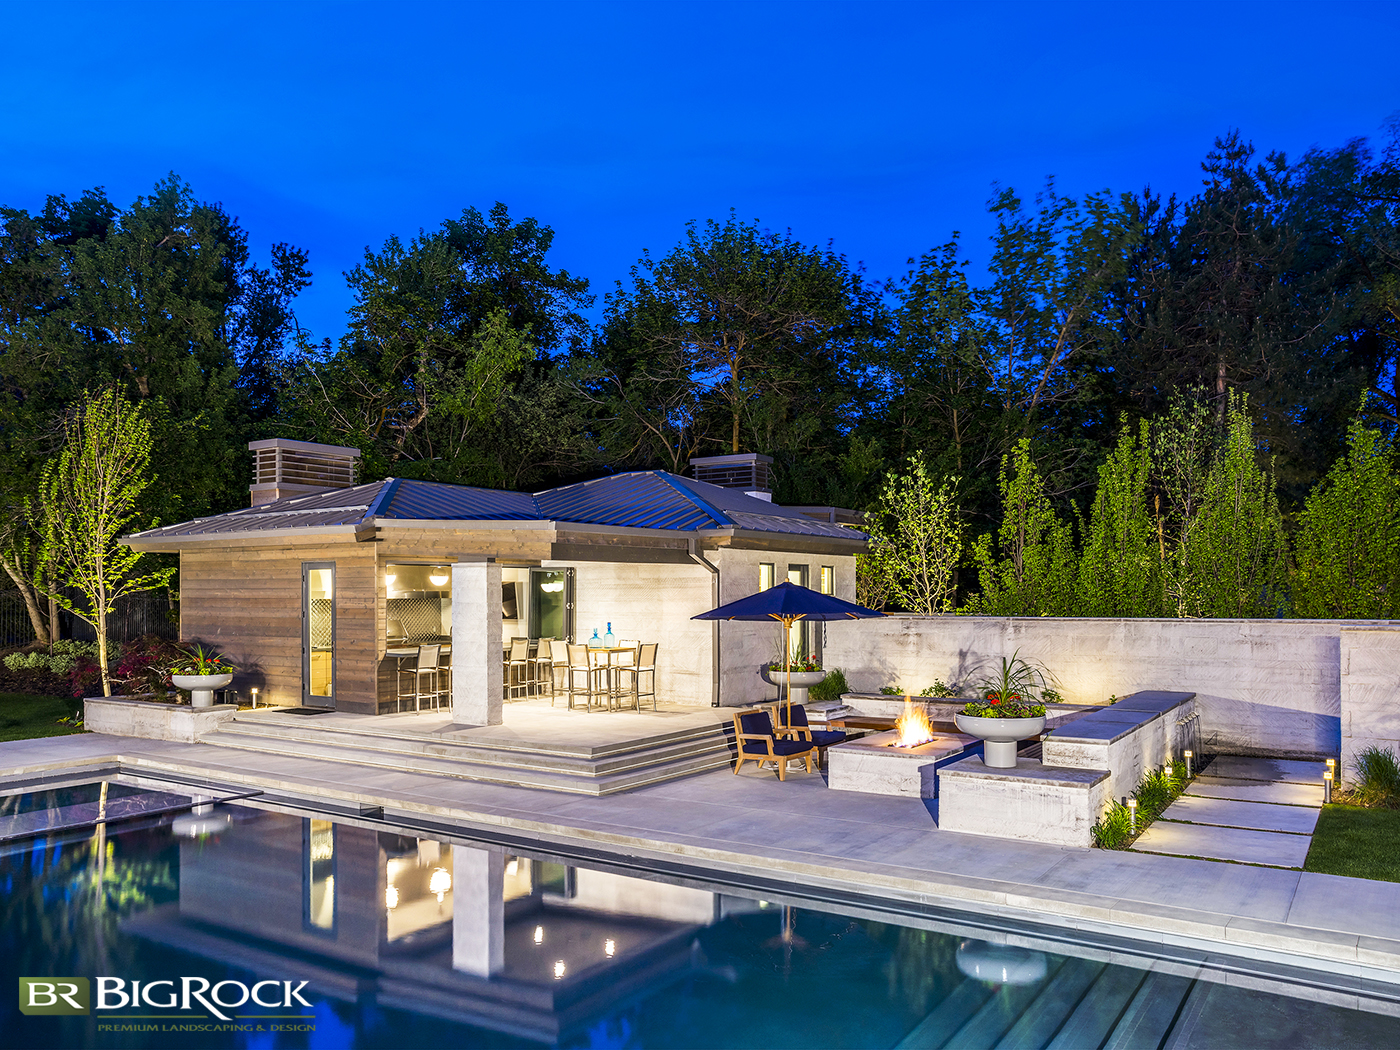 An outdoor living area with a modern look and feel, including the pool and landscaping with cement stairs.